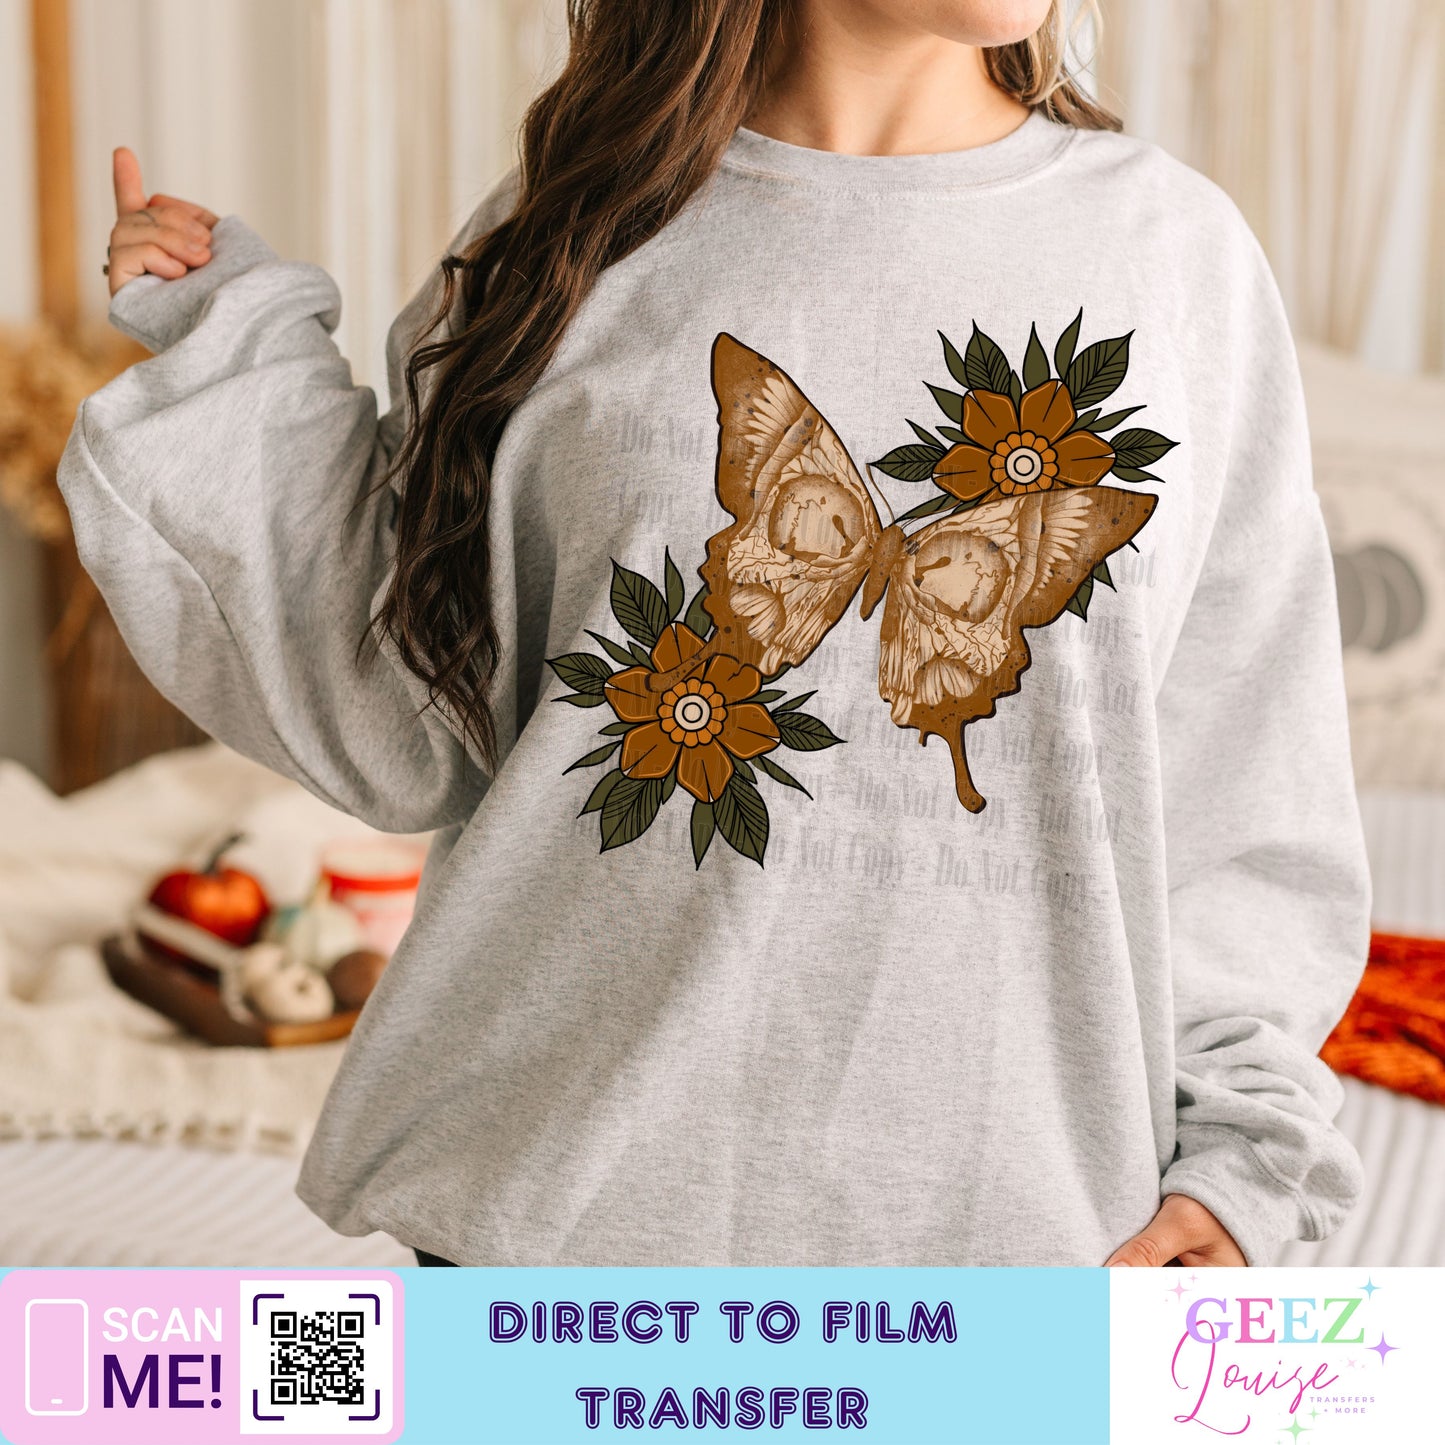 Butterfly - Direct to Film Transfer - made to order